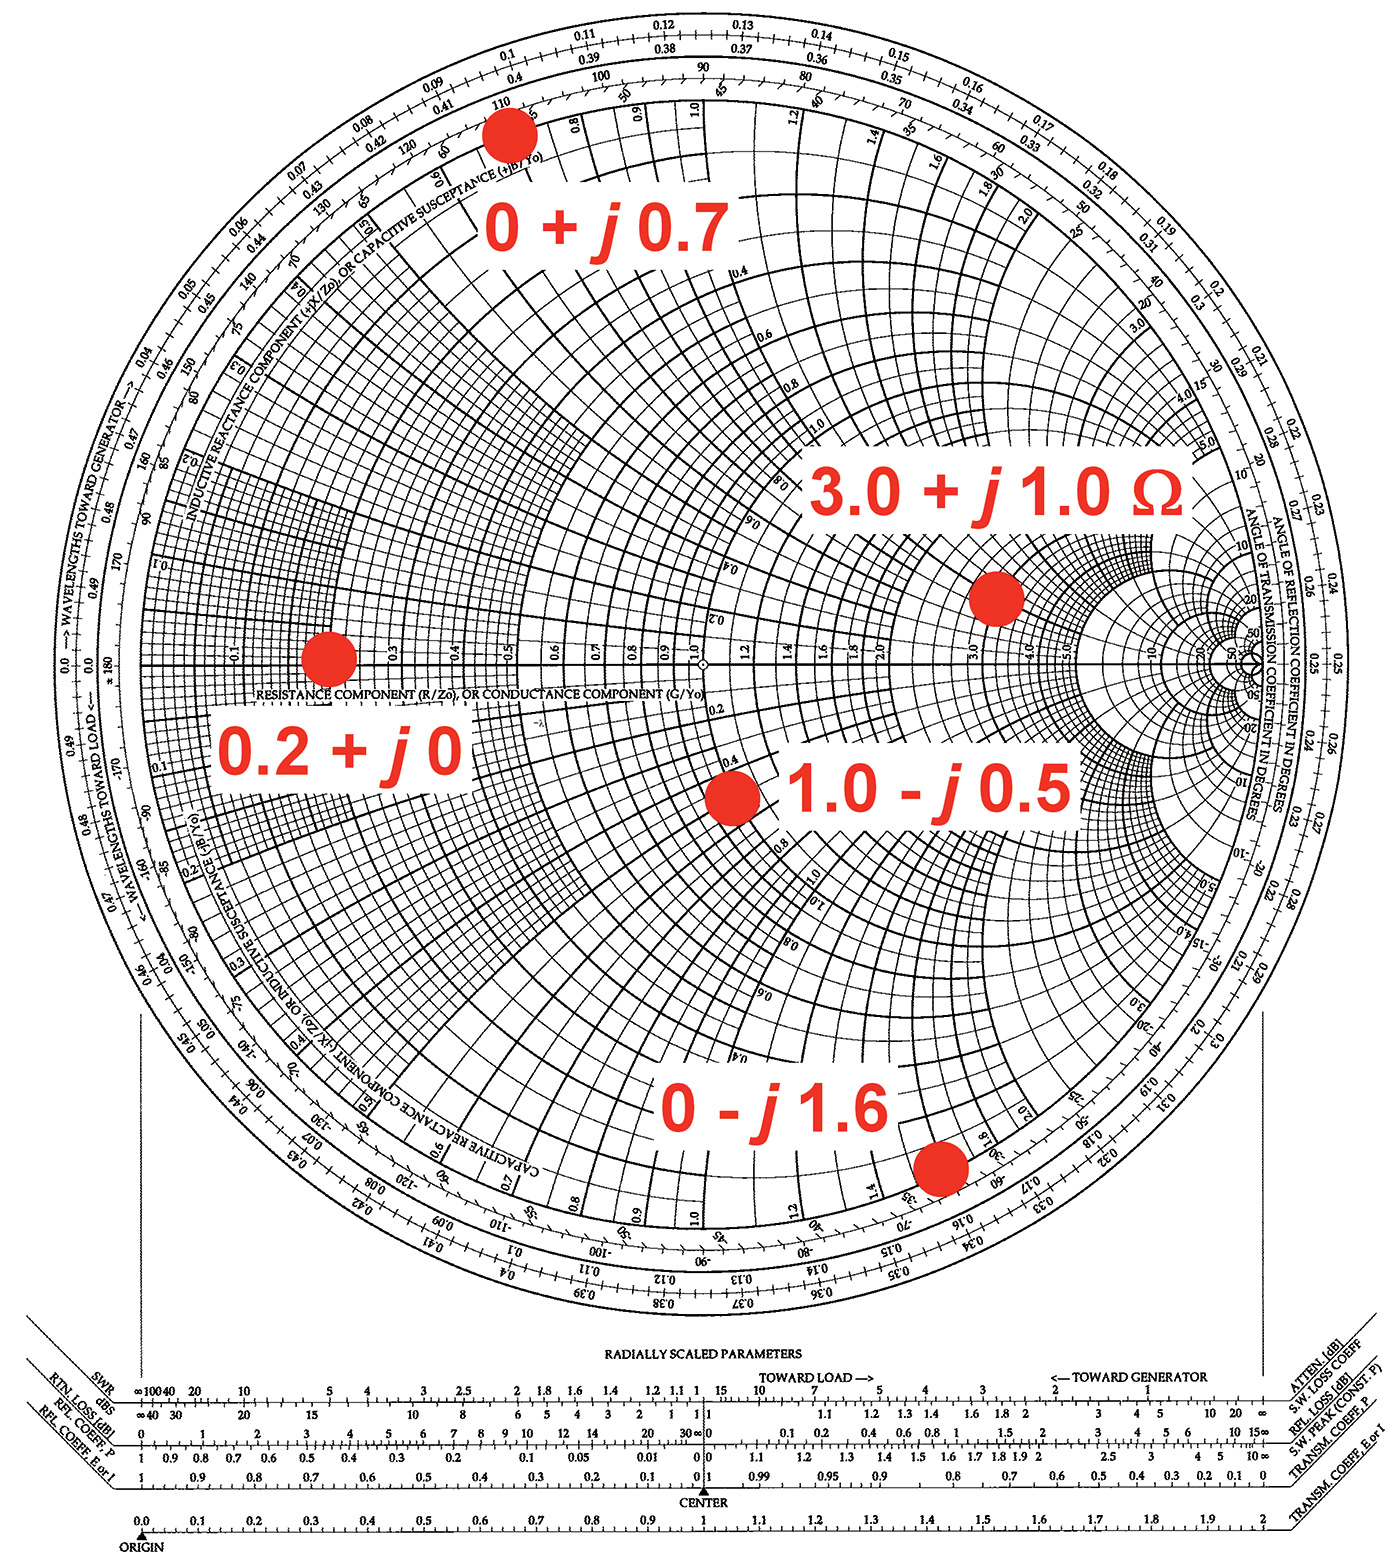 using smith chart to match impedance